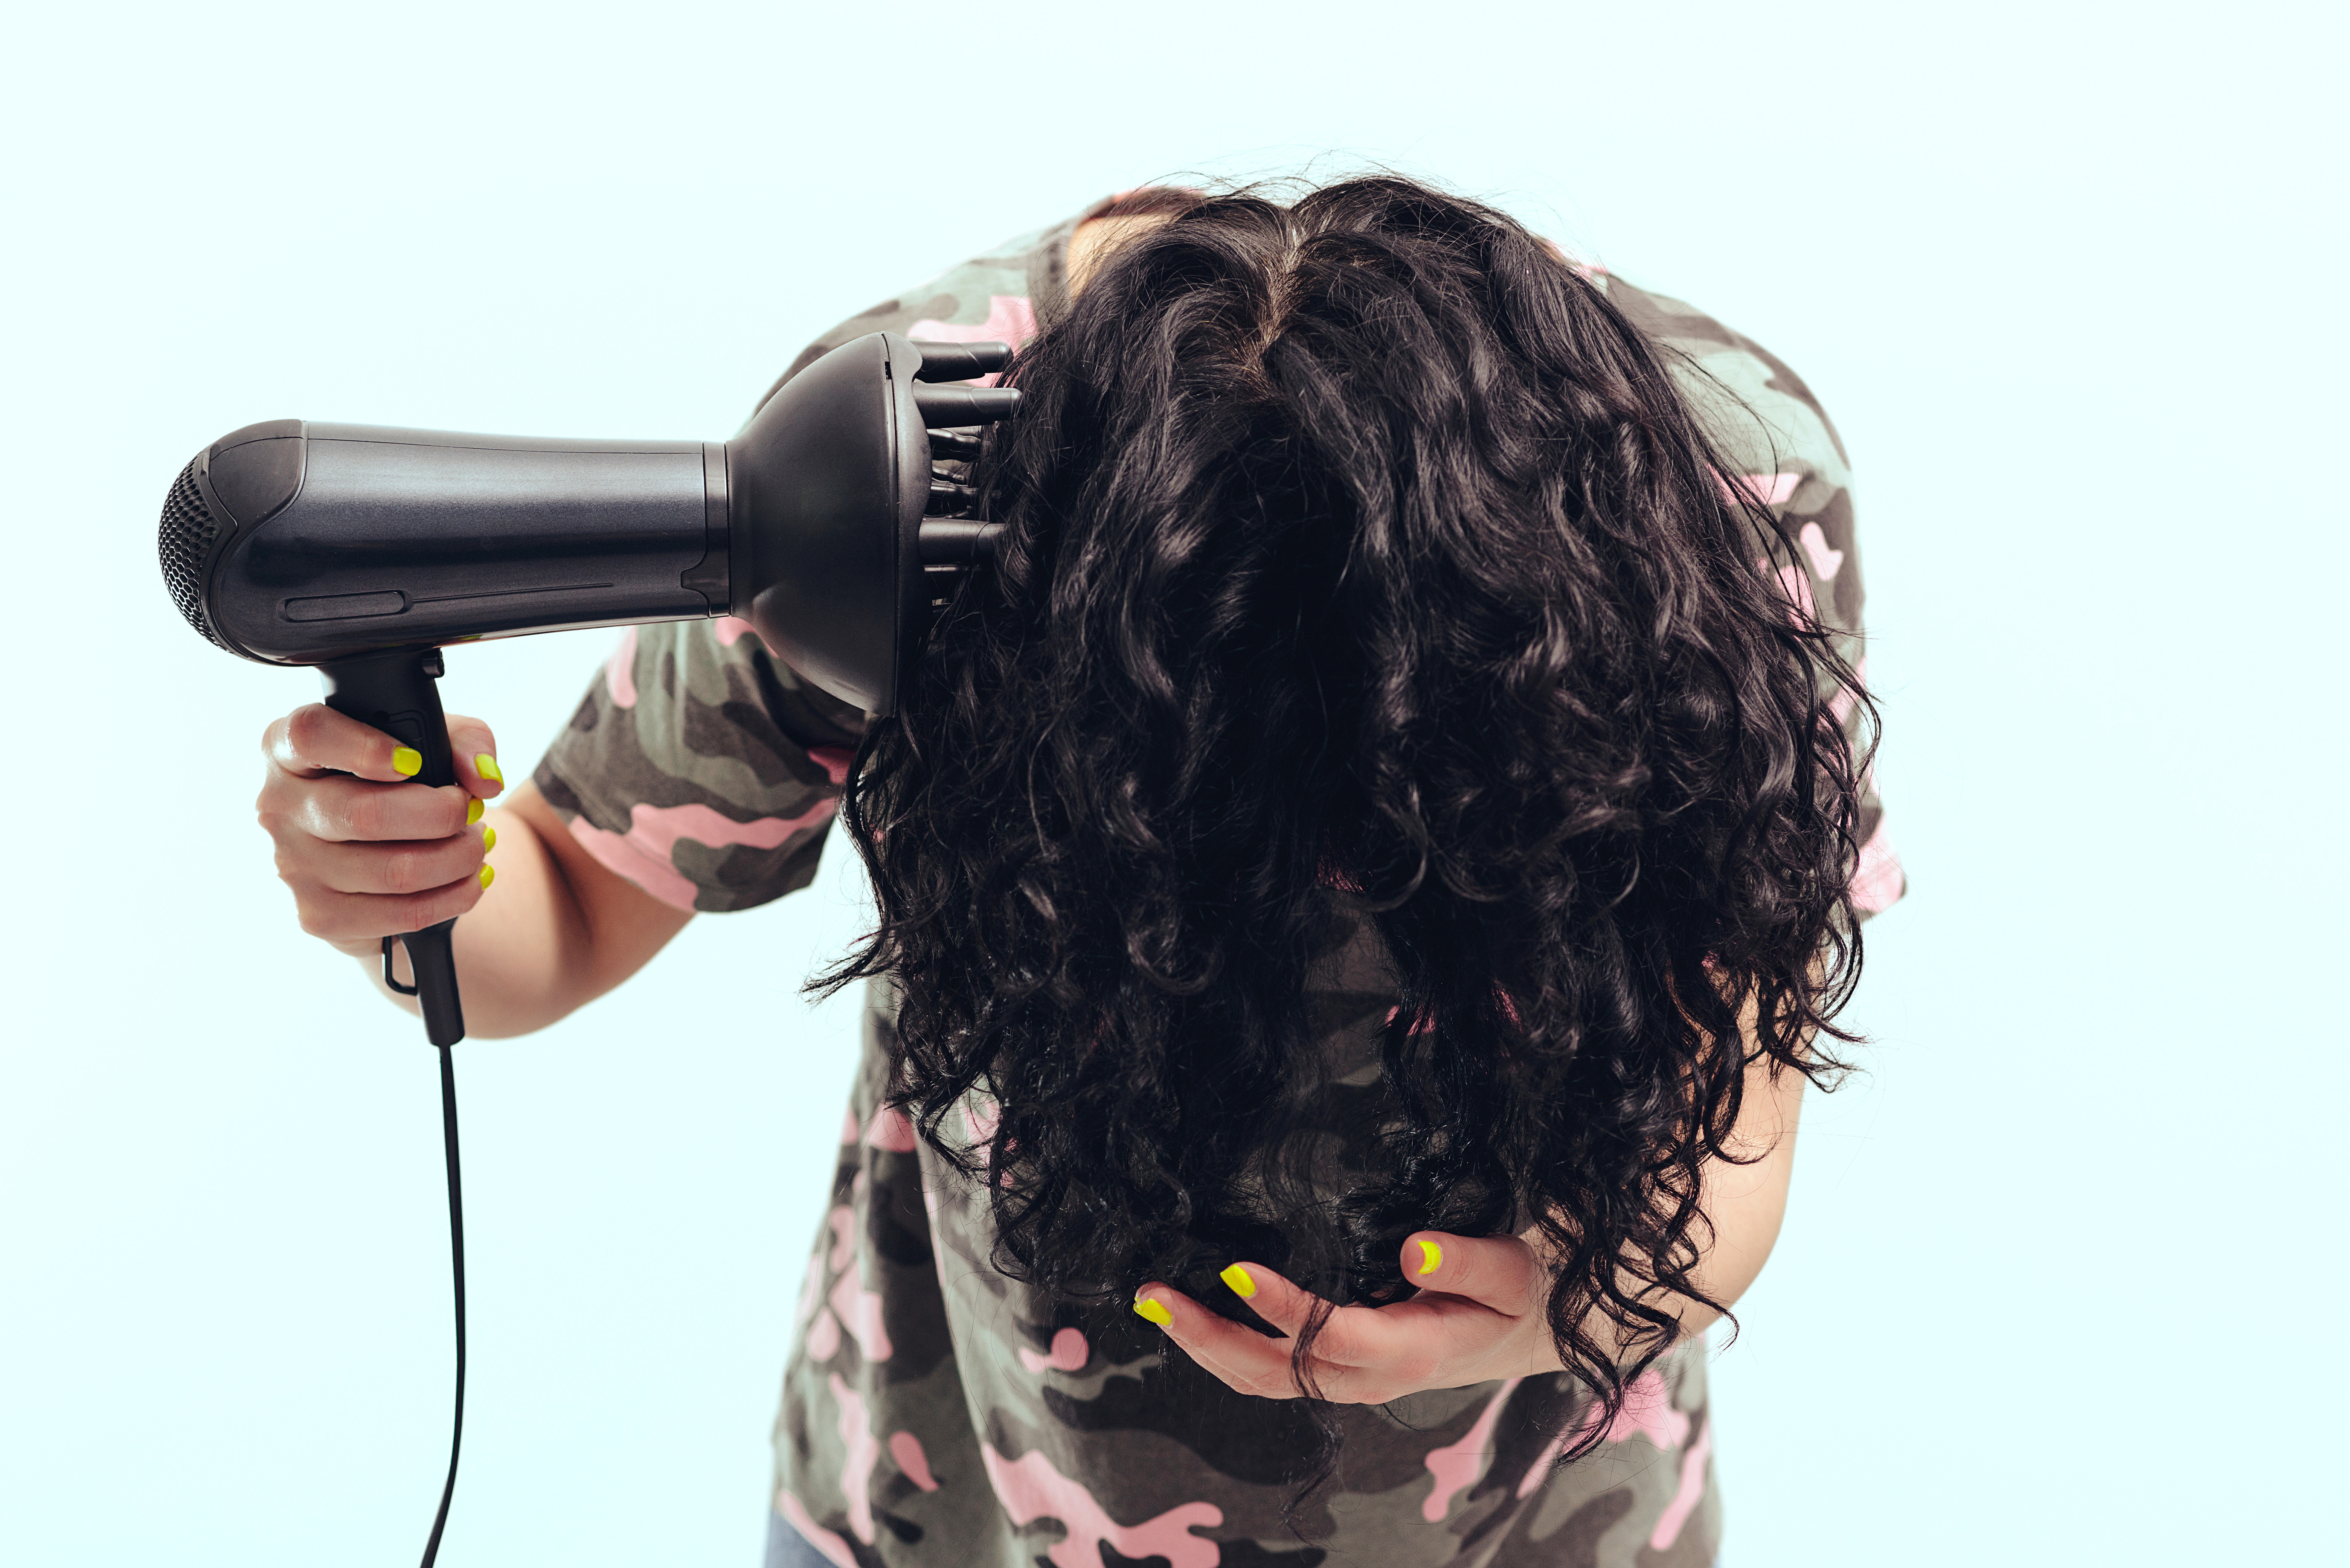 A woman is pictured styling her curly hair with hairdryer with special diffuser nozzle | Source: Shutterstock